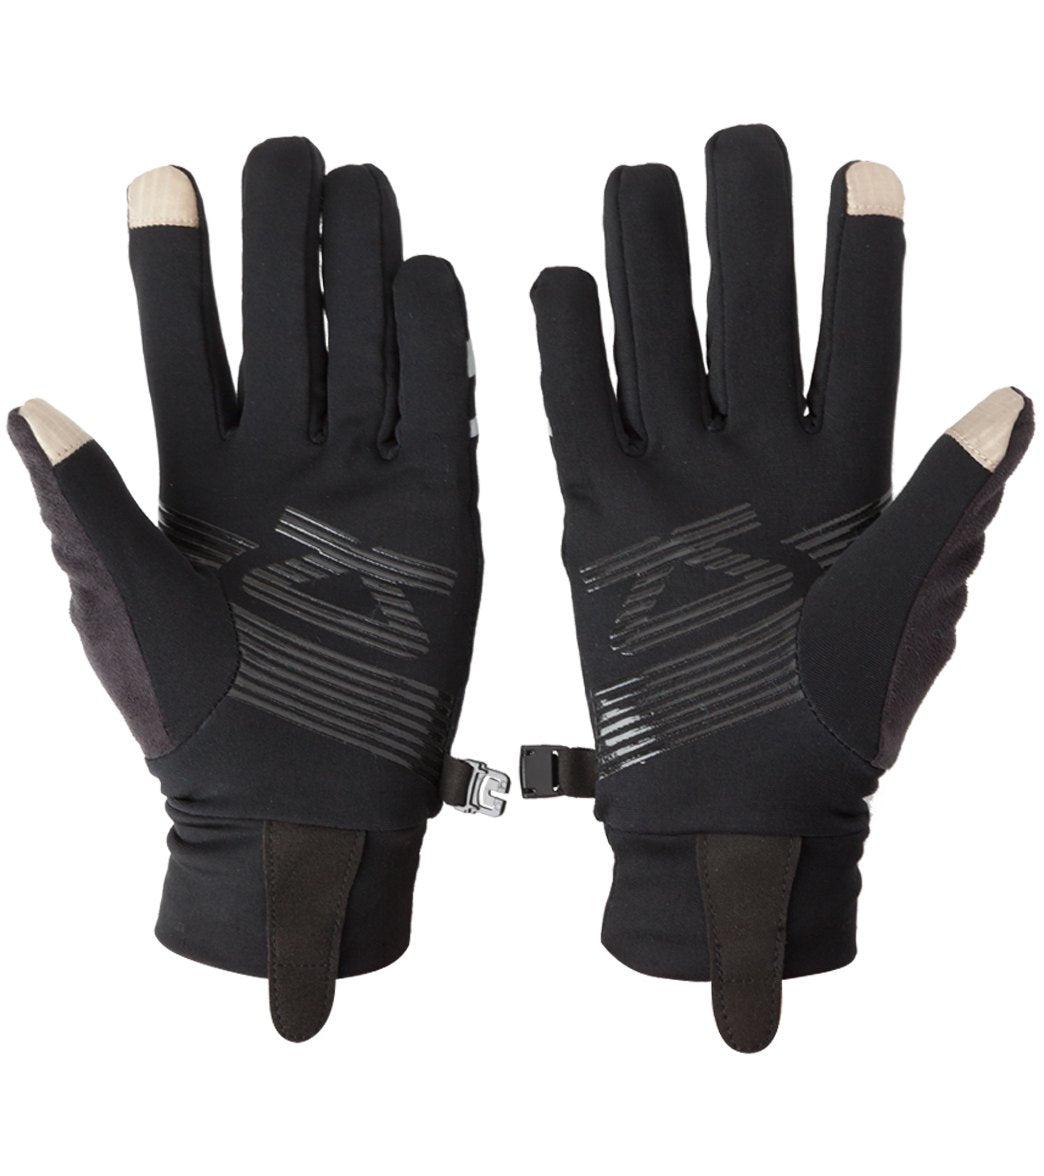 Black Sports Breathable Reflective Higher State Unisex Running Gloves 